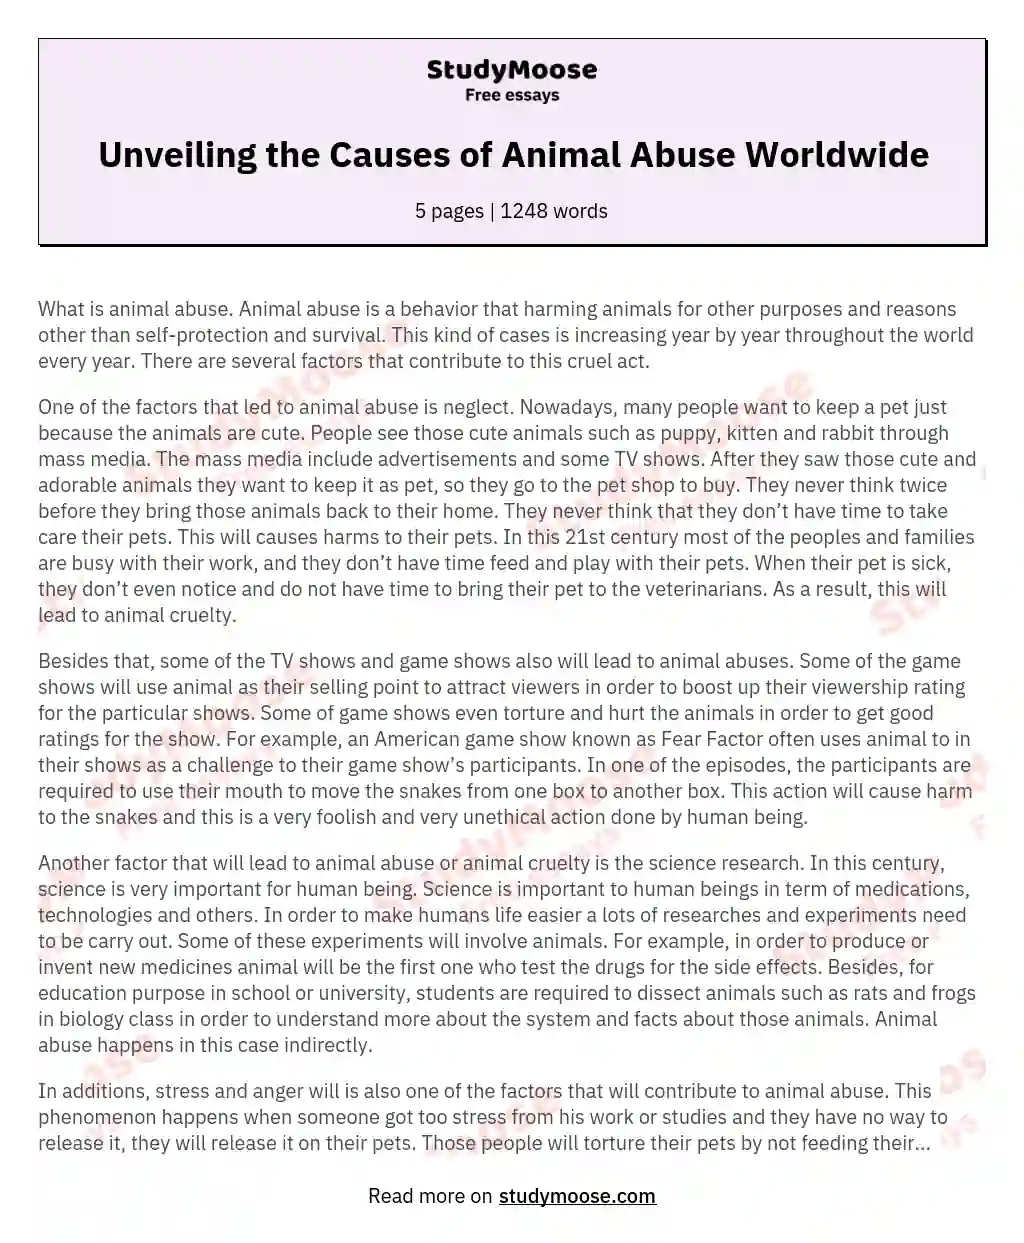 What Is Animal Abuse? Free Essay Example